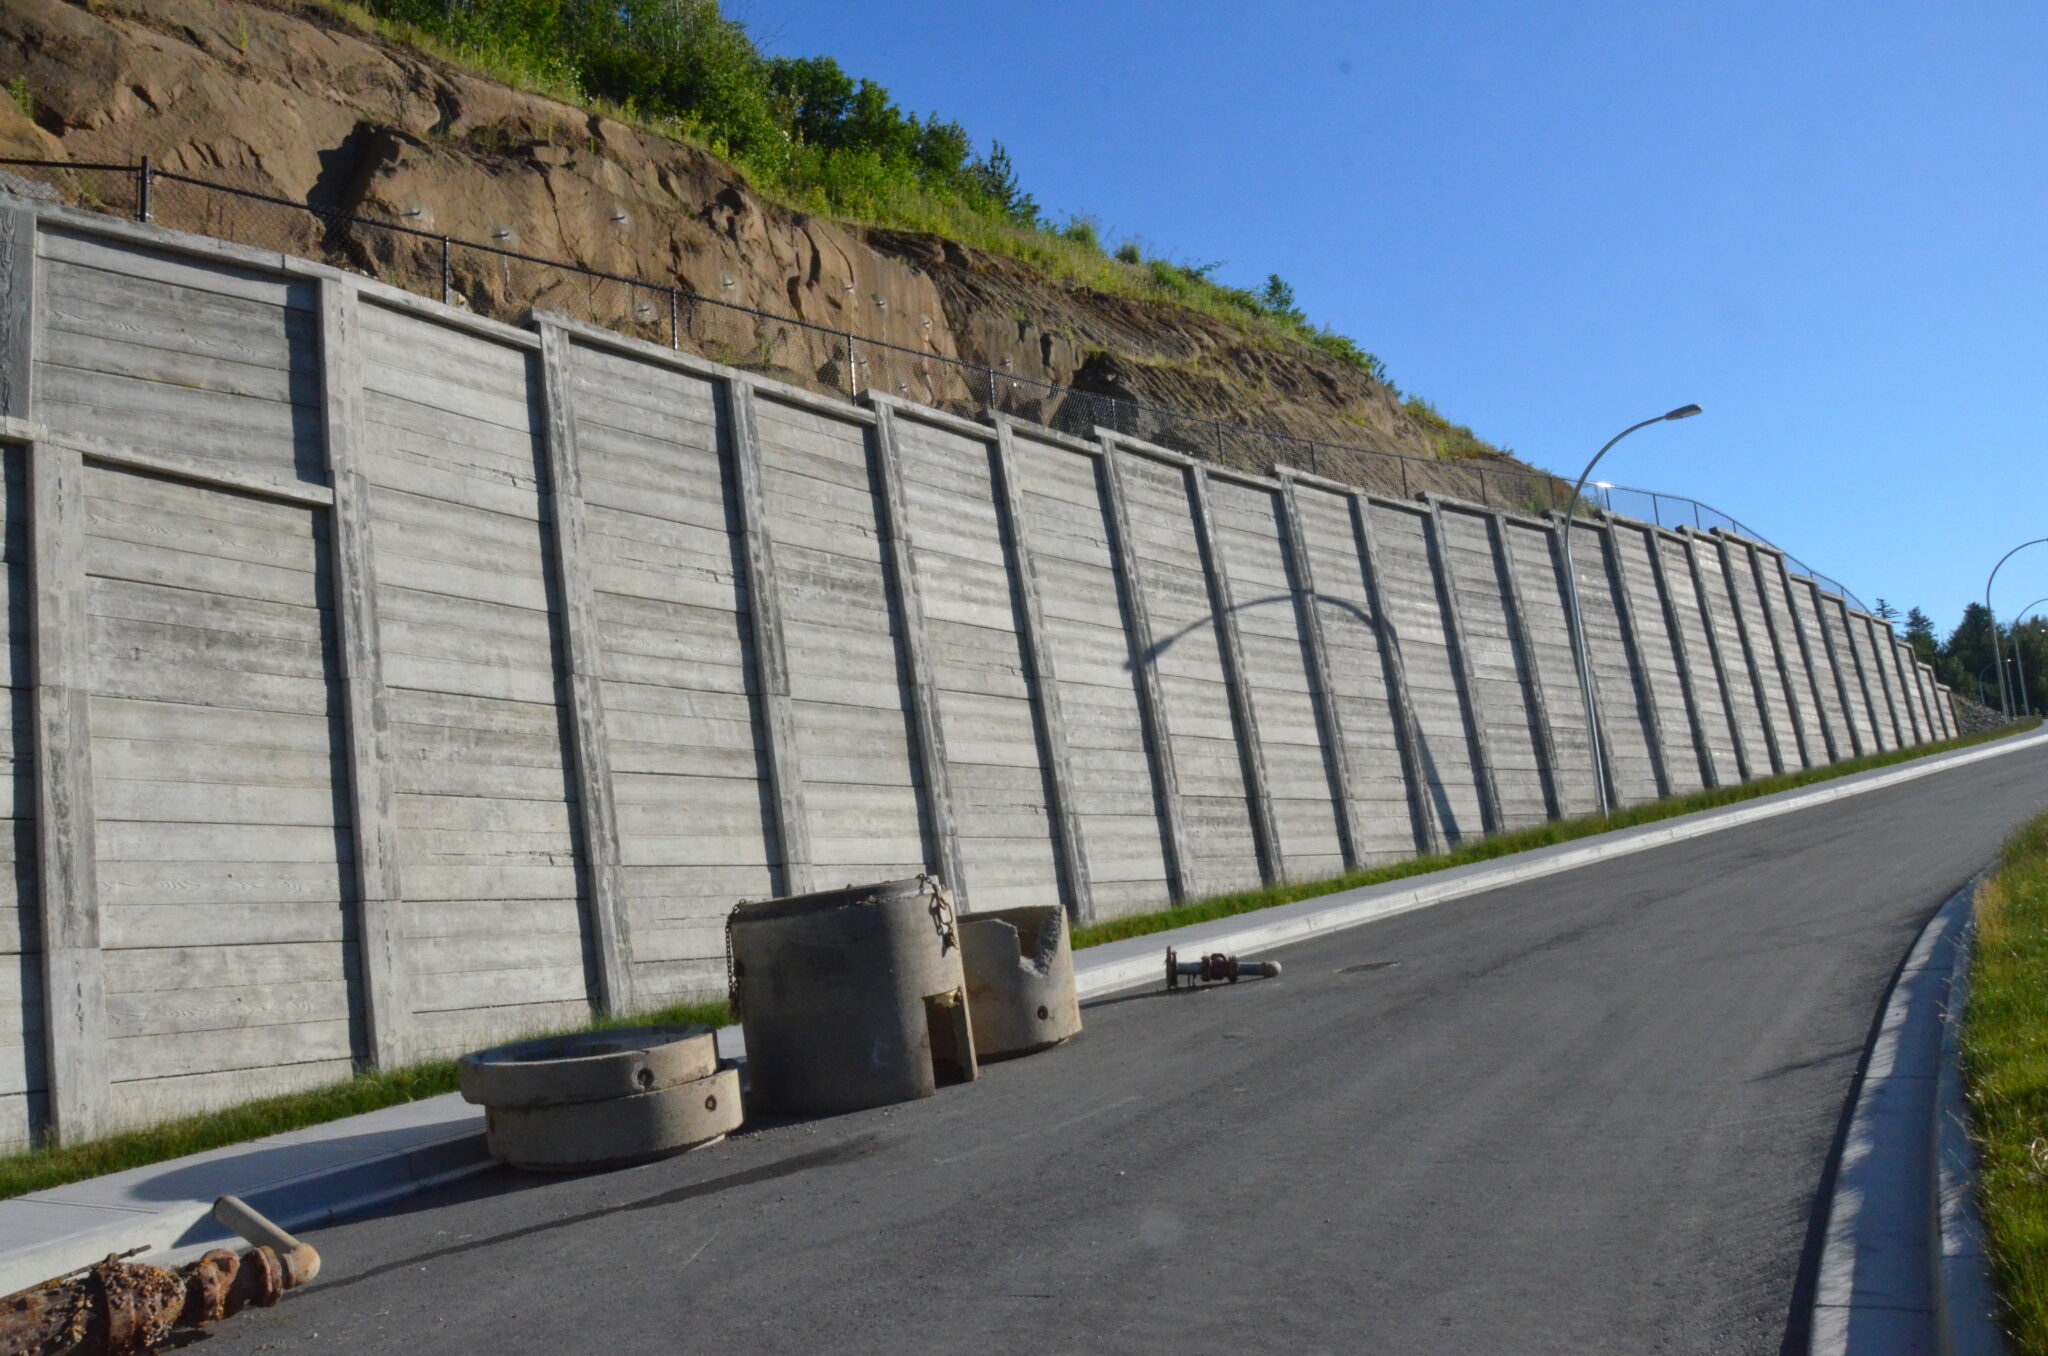 Slope Stabilization and Retaining Wall Construction To Make The Road Safe